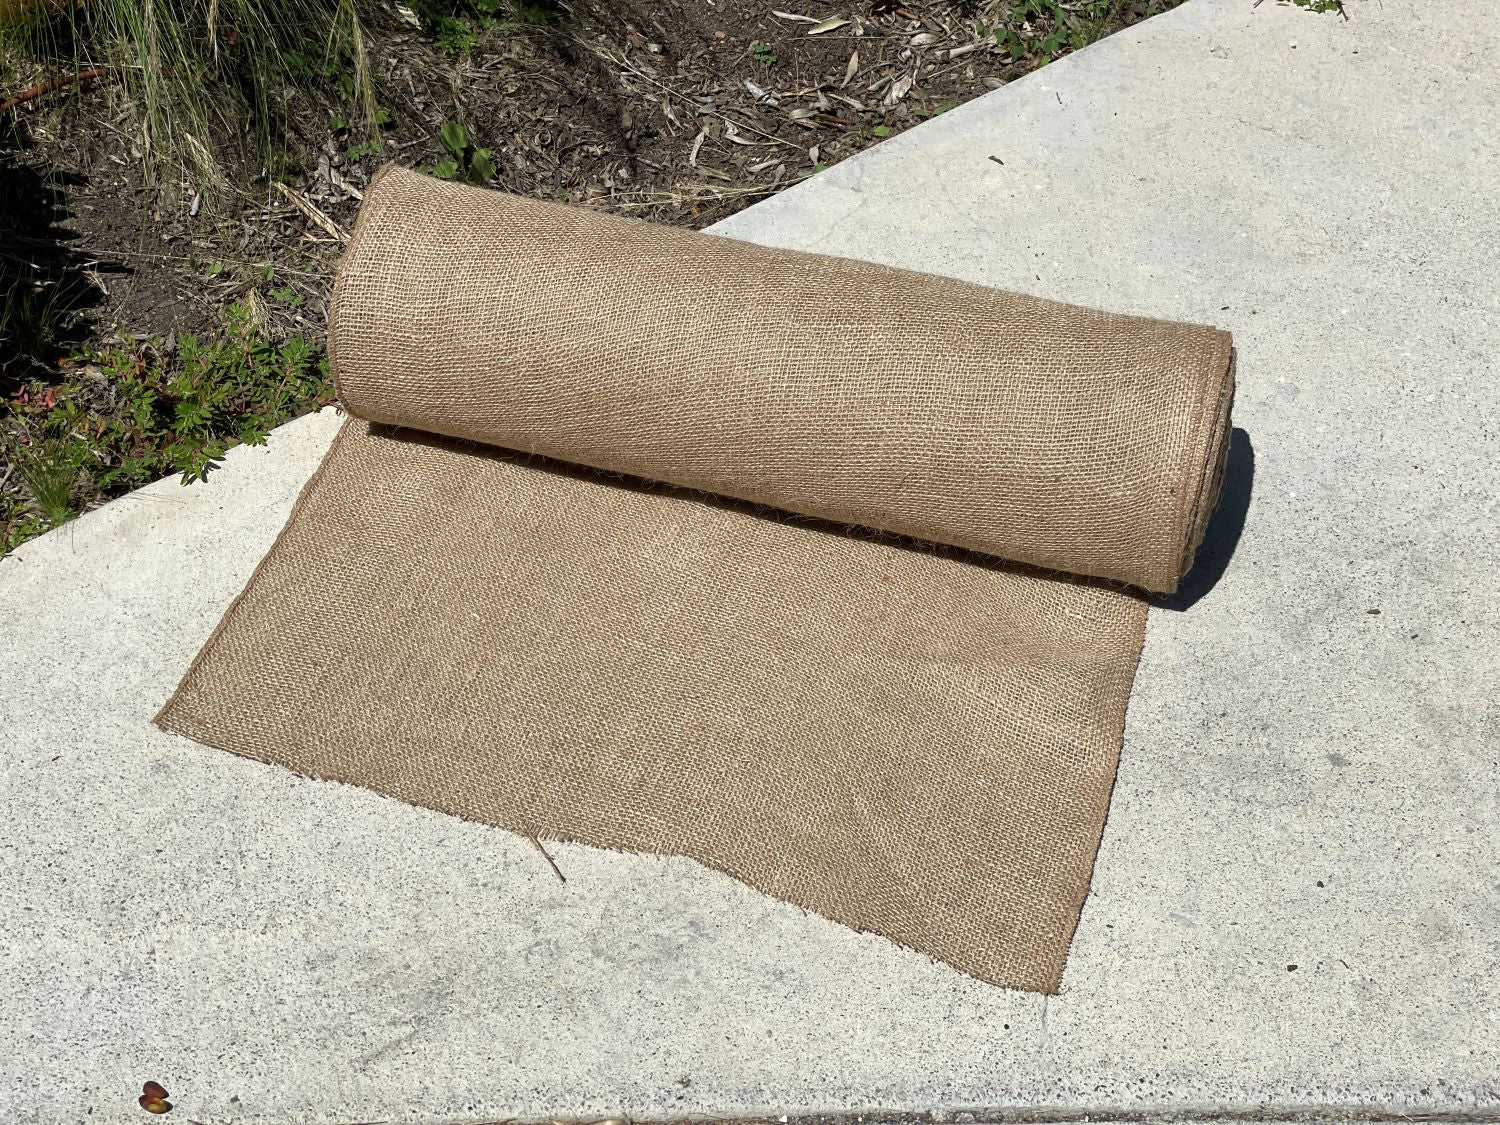 Burlap Roll Natural Burlap Fabric Multipurpose Rustic Fabric Roll for  Garden Wedding Table Runners Home Party Decor (63 Inch x 30 Feet)